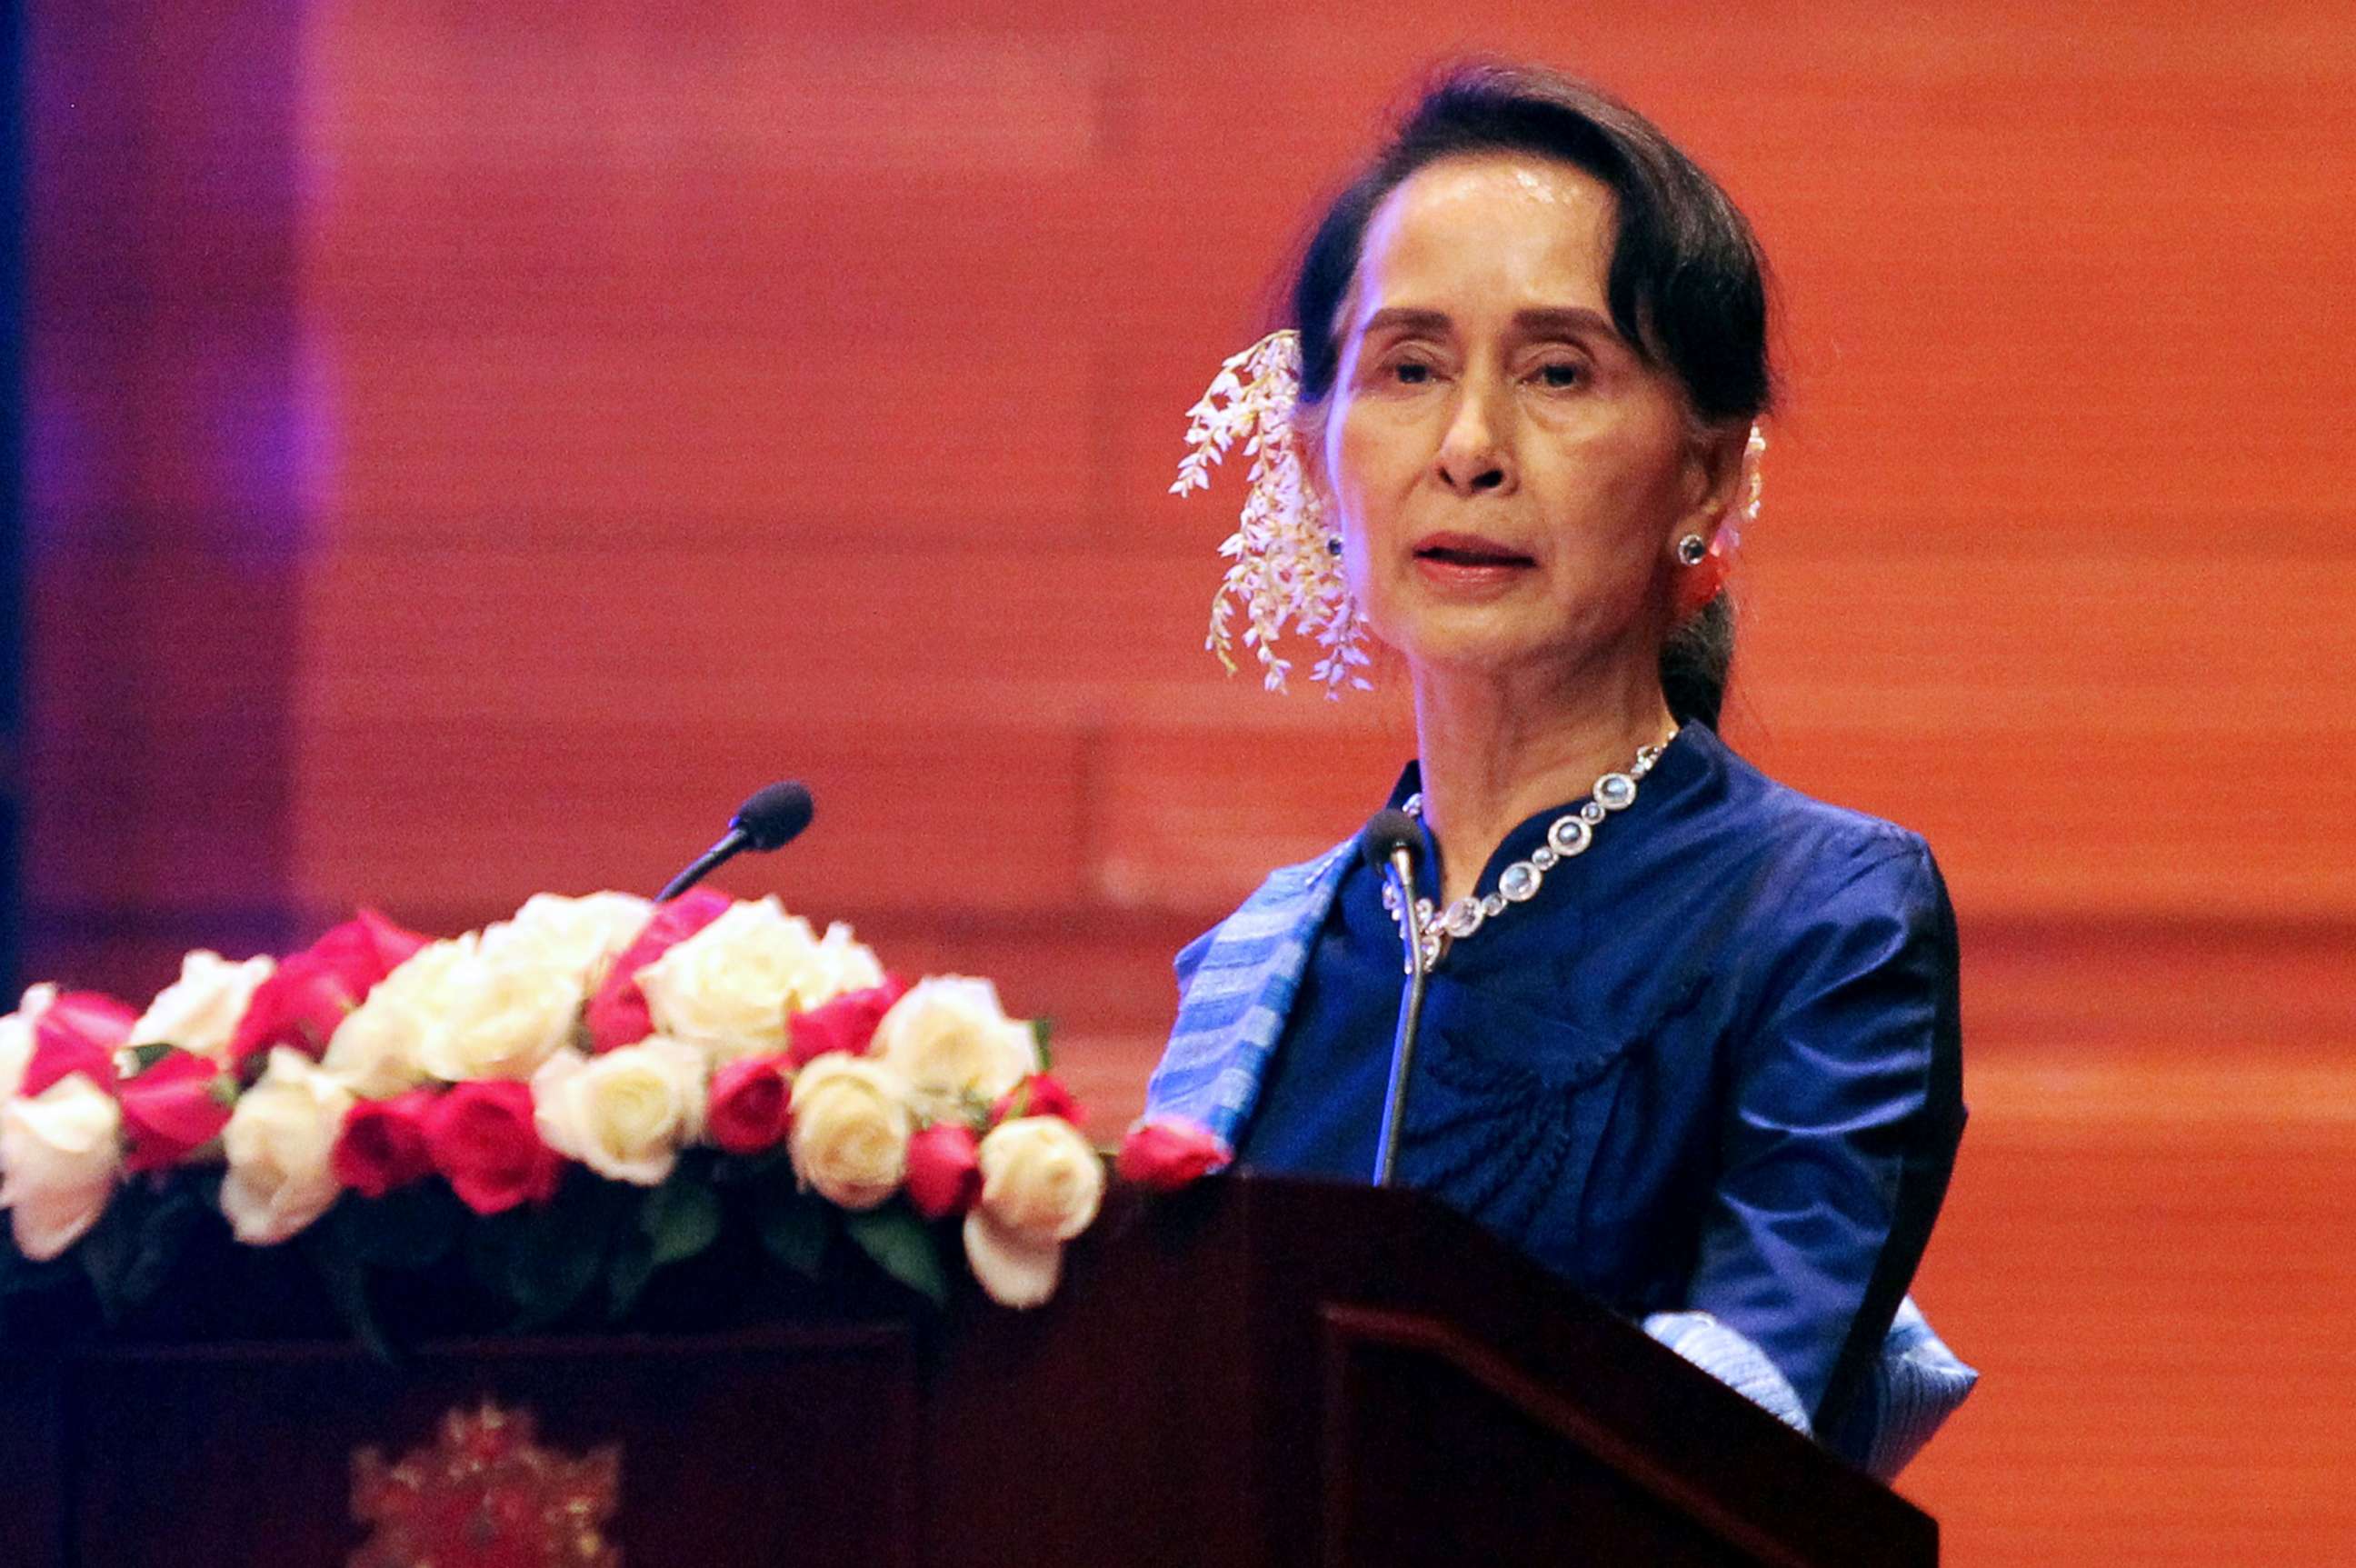 PHOTO: Myanmar State Counsellor Aung San Suu Kyi delivers her address during a signing ceremony for a ceasefire agreement with two armed ethnic groups, New Mon State Party (NMSP) and Lahu Democratic Union (LDU) in the capital Naypyidaw, Feb. 13, 2018.